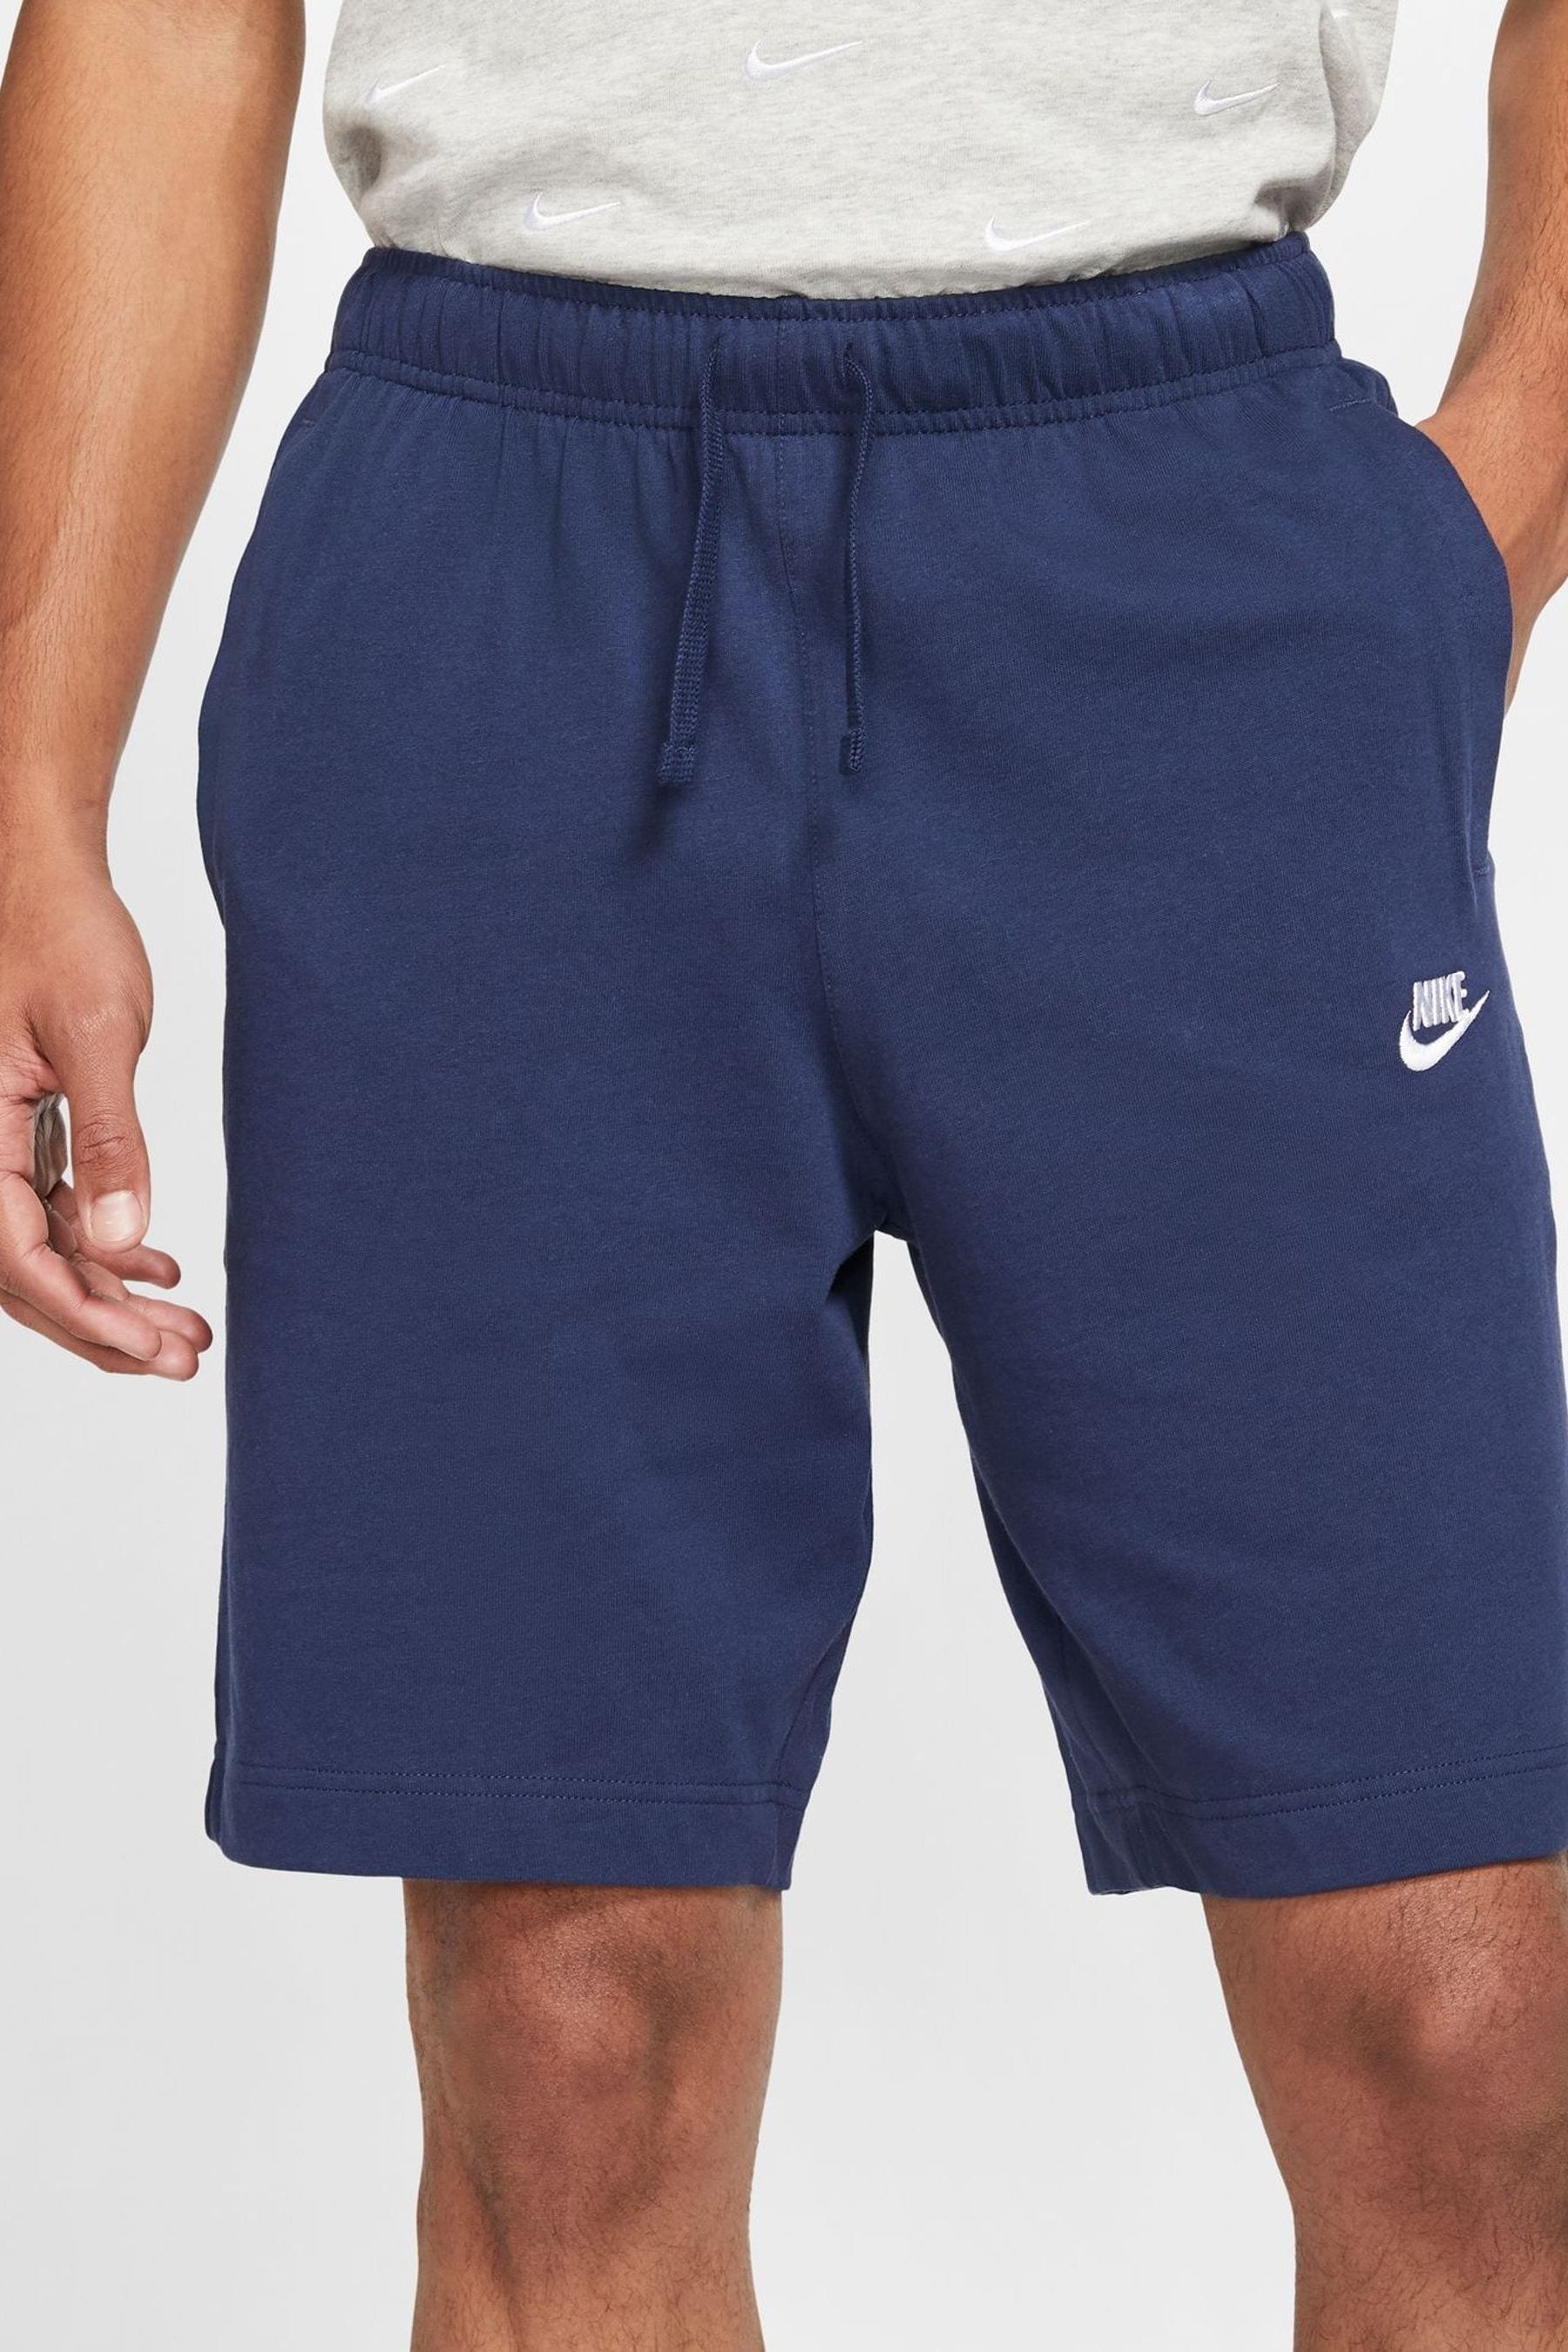 Buy Nike Club Shorts from the Next UK online shop